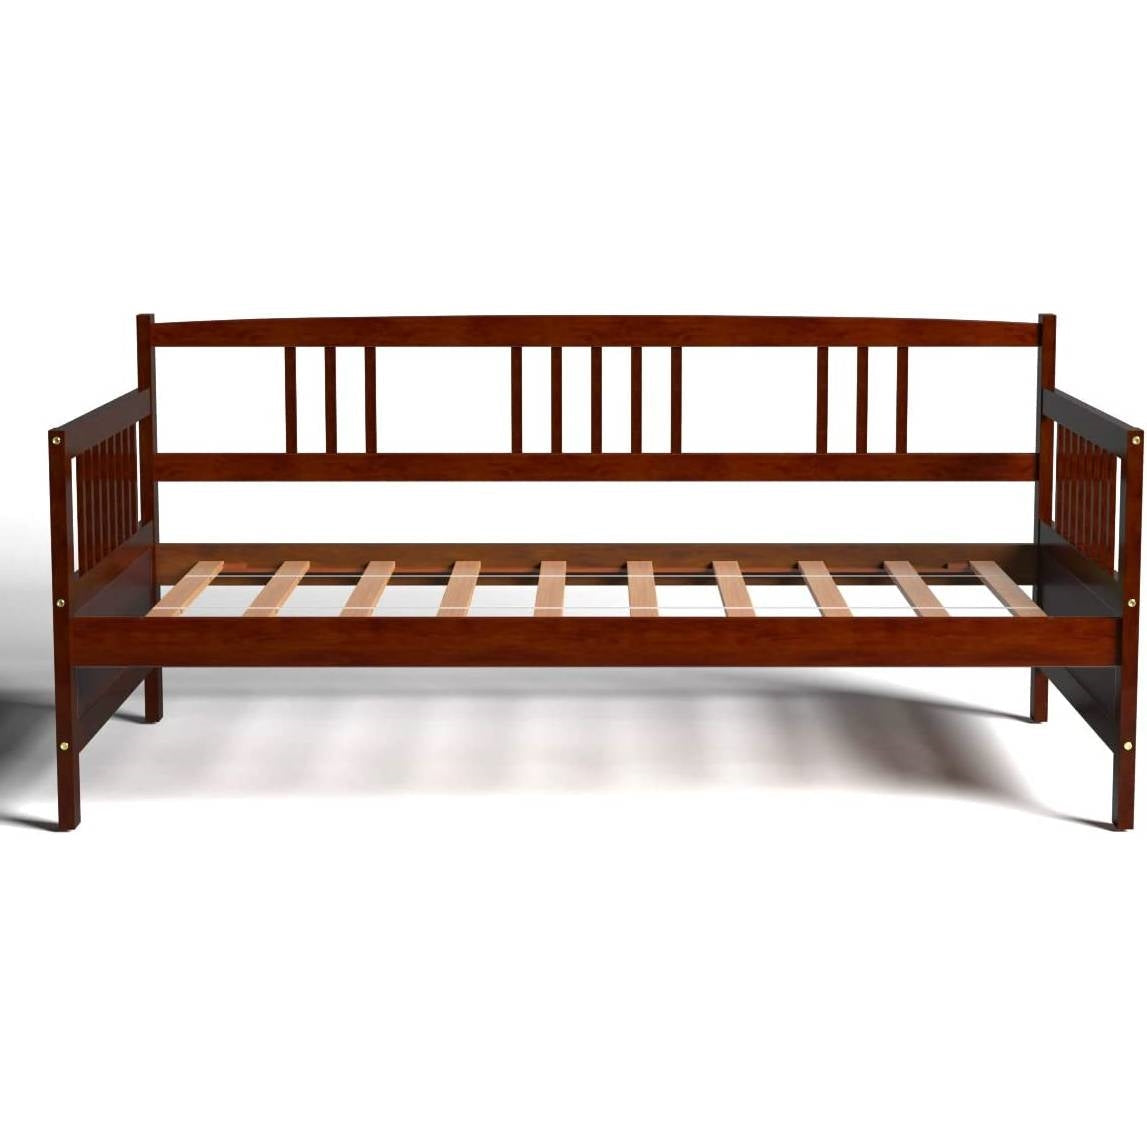 Bedroom > Bed Frames > Daybeds - Twin Size 2-in-1 Wood Daybed Frame Sofa Bed In Brown Cherry Finish